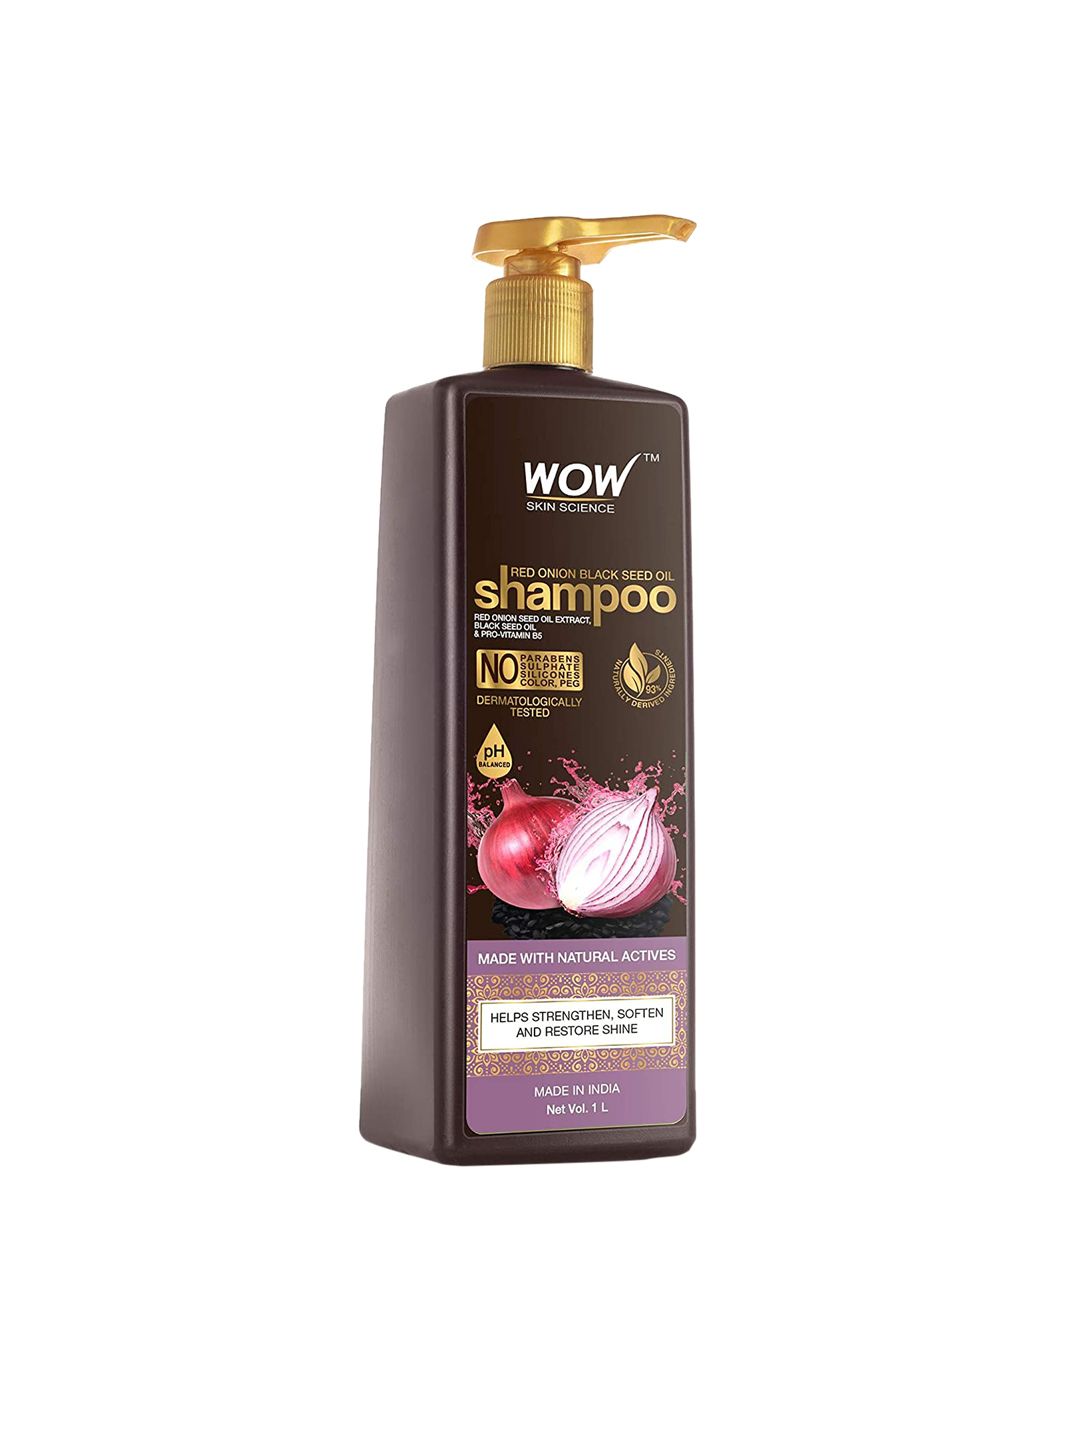 WOW SKIN SCIENCE Onion Shampoo for Hair Growth with Red Onion Seed Oil Extract - 1 Litre Price in India